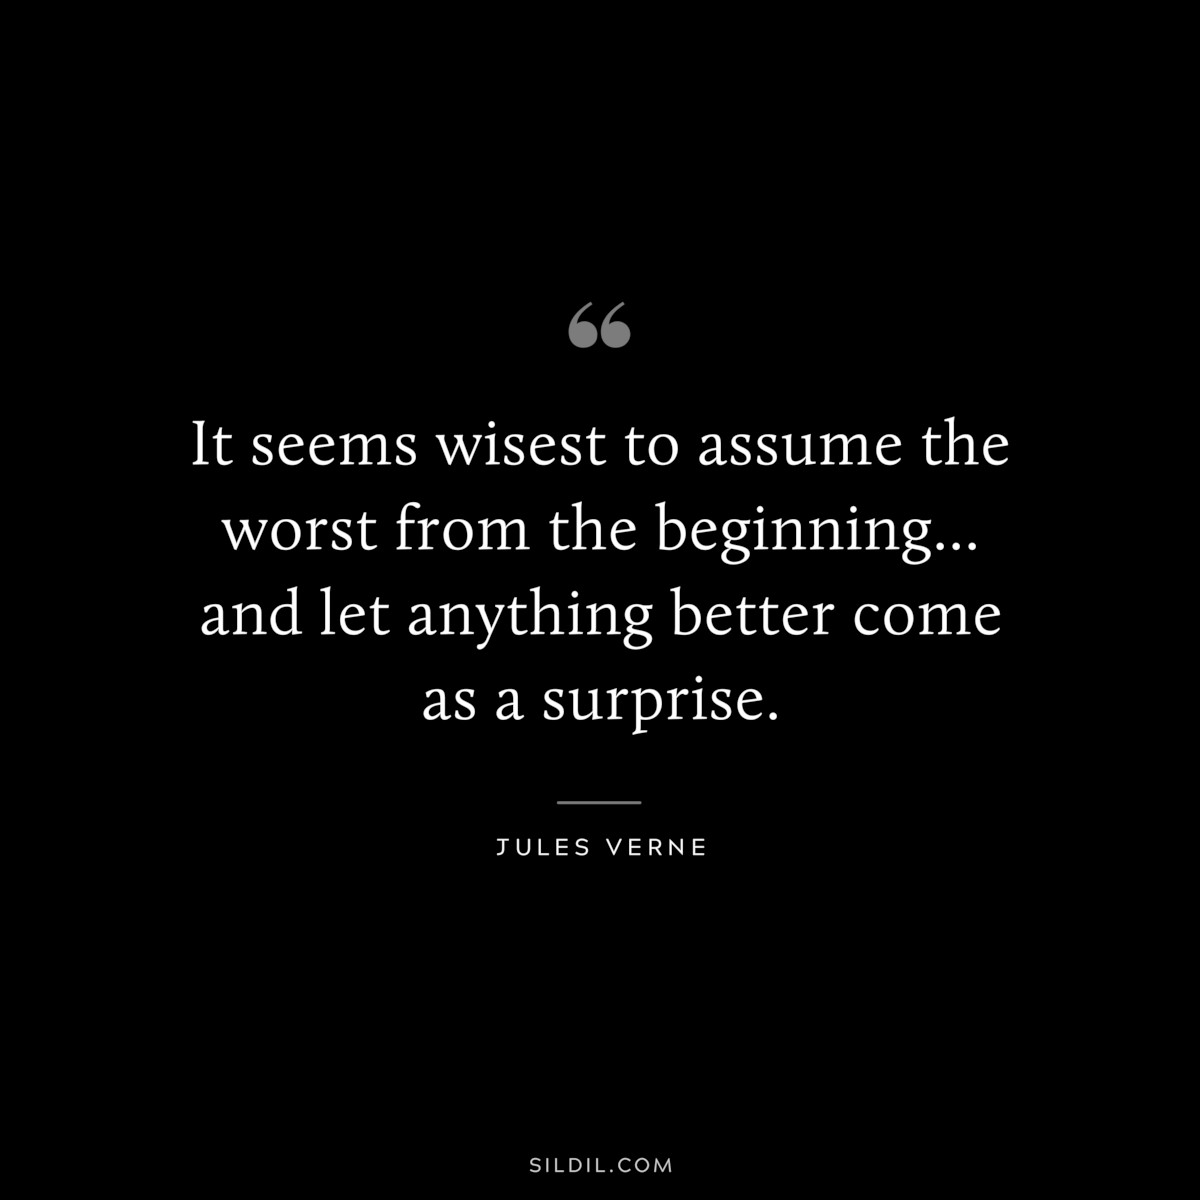 It seems wisest to assume the worst from the beginning...and let anything better come as a surprise.